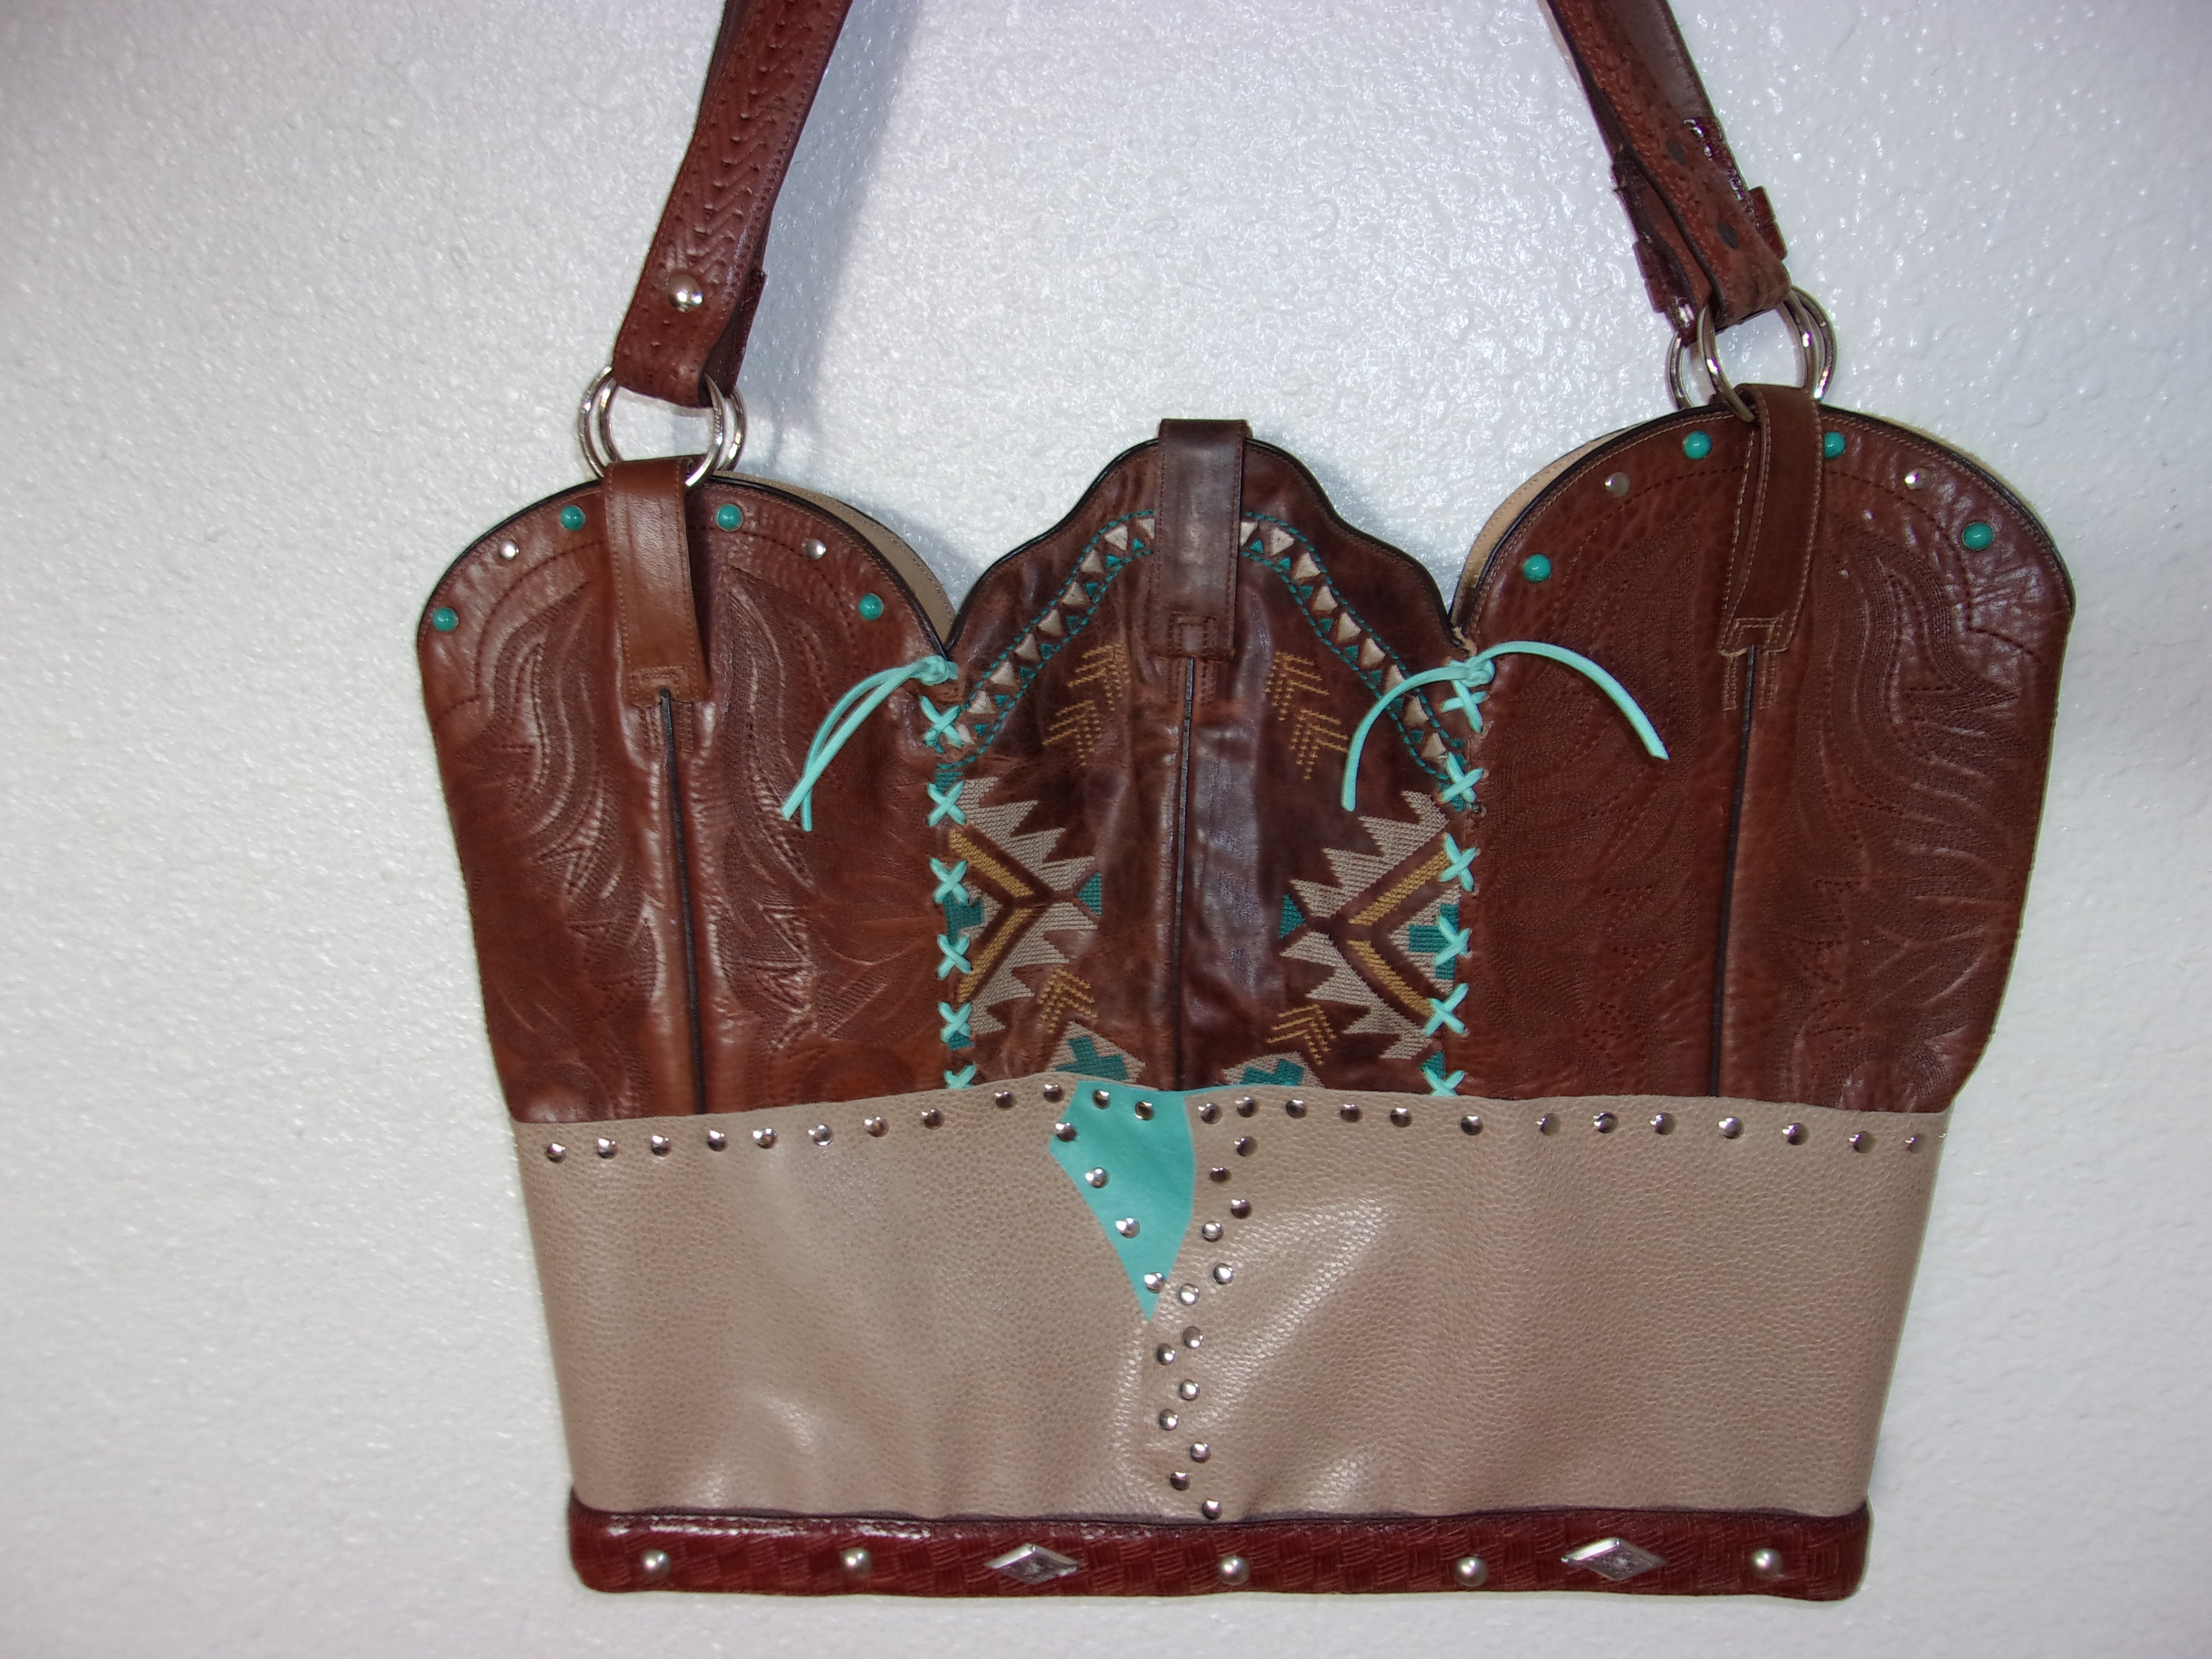 Western Laptop Tote - Extra Large Cowboy Boot Purse - Western Travel Bag  LT31 cowboy boot purses, western fringe purse, handmade leather purses, boot purse, handmade western purse, custom leather handbags Chris Thompson Bags